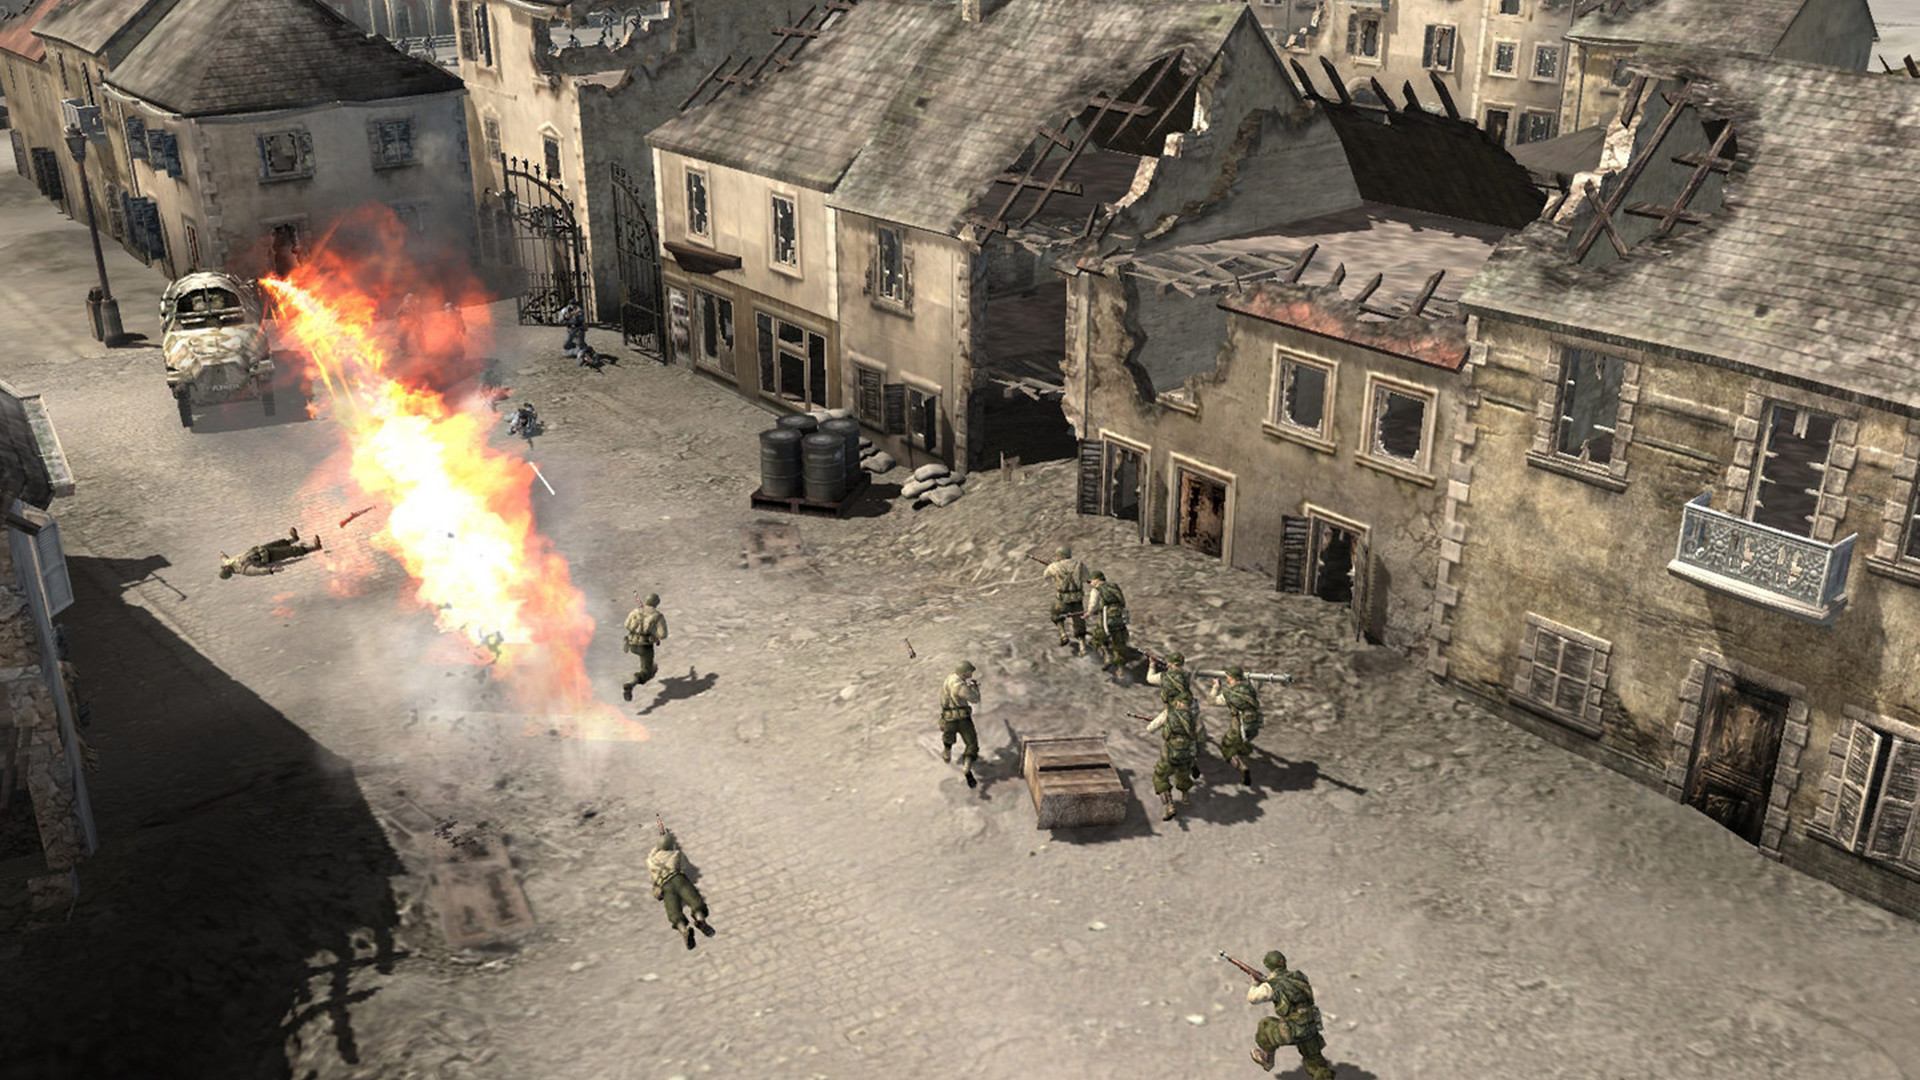 Company of Heroes - Legacy Edition on Steam